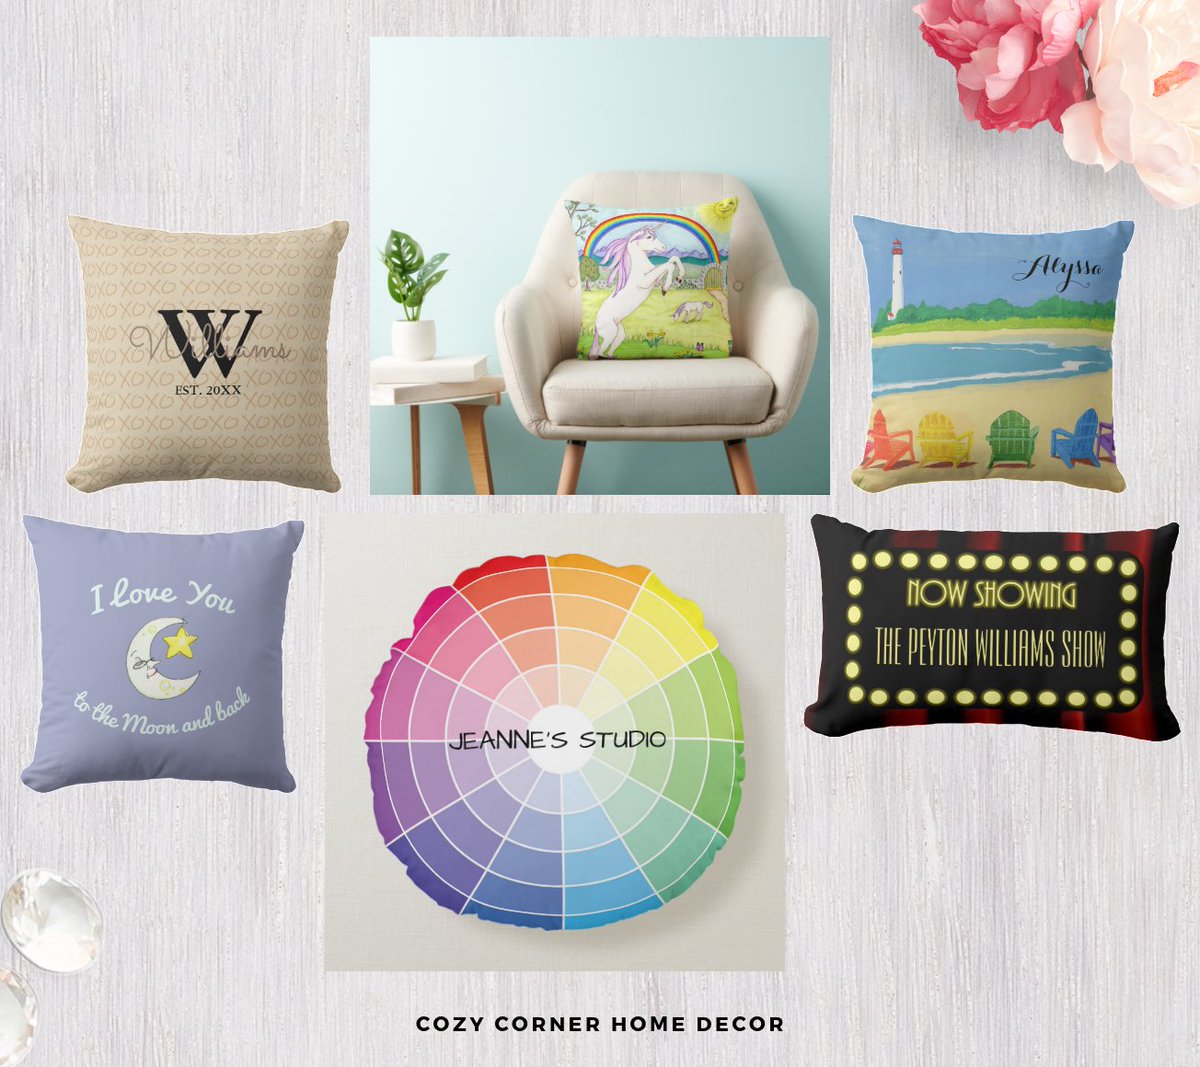 TODAY ONLY 40% Off Pillows 🛋️🎉
USE CODE: WEDFLASHSALE
#PersonalizedPillow #CustomPillow #GiftForMom #MothersDayGift #PersonalizedMothersDay #ThrowPillow
zazzle.com/collections/co…